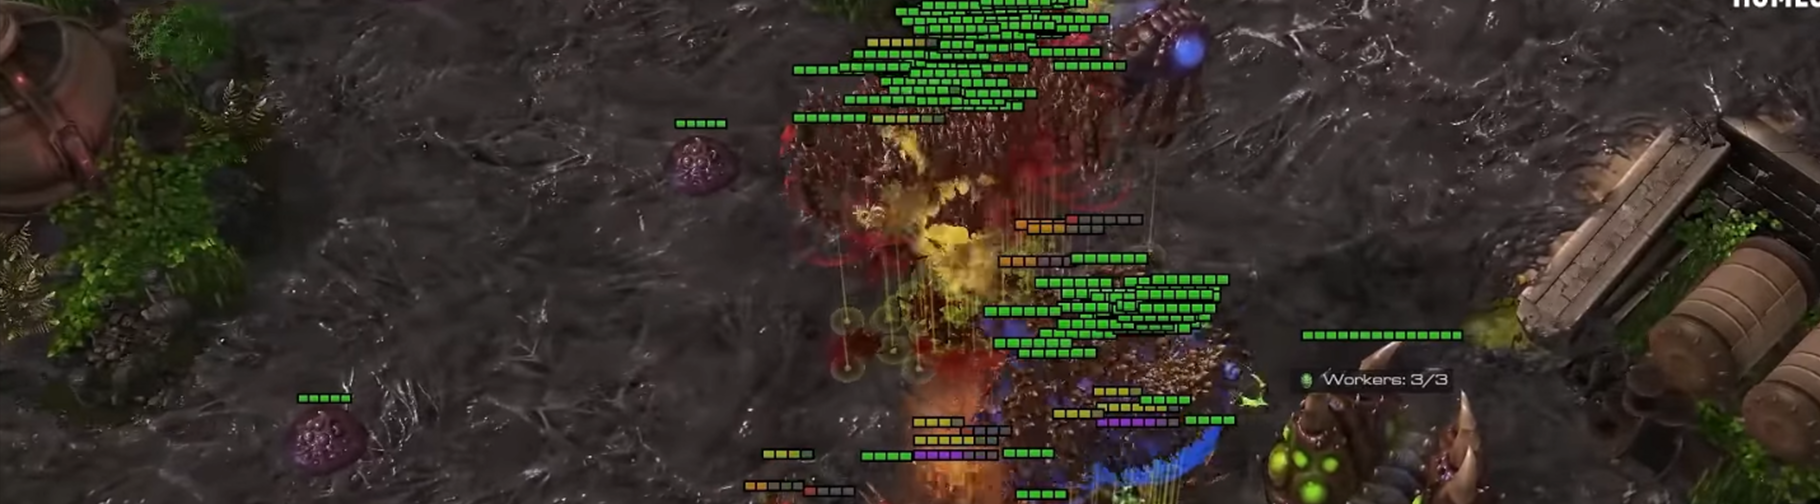 Two Starcraft 2 mutalisk armies fighting each other